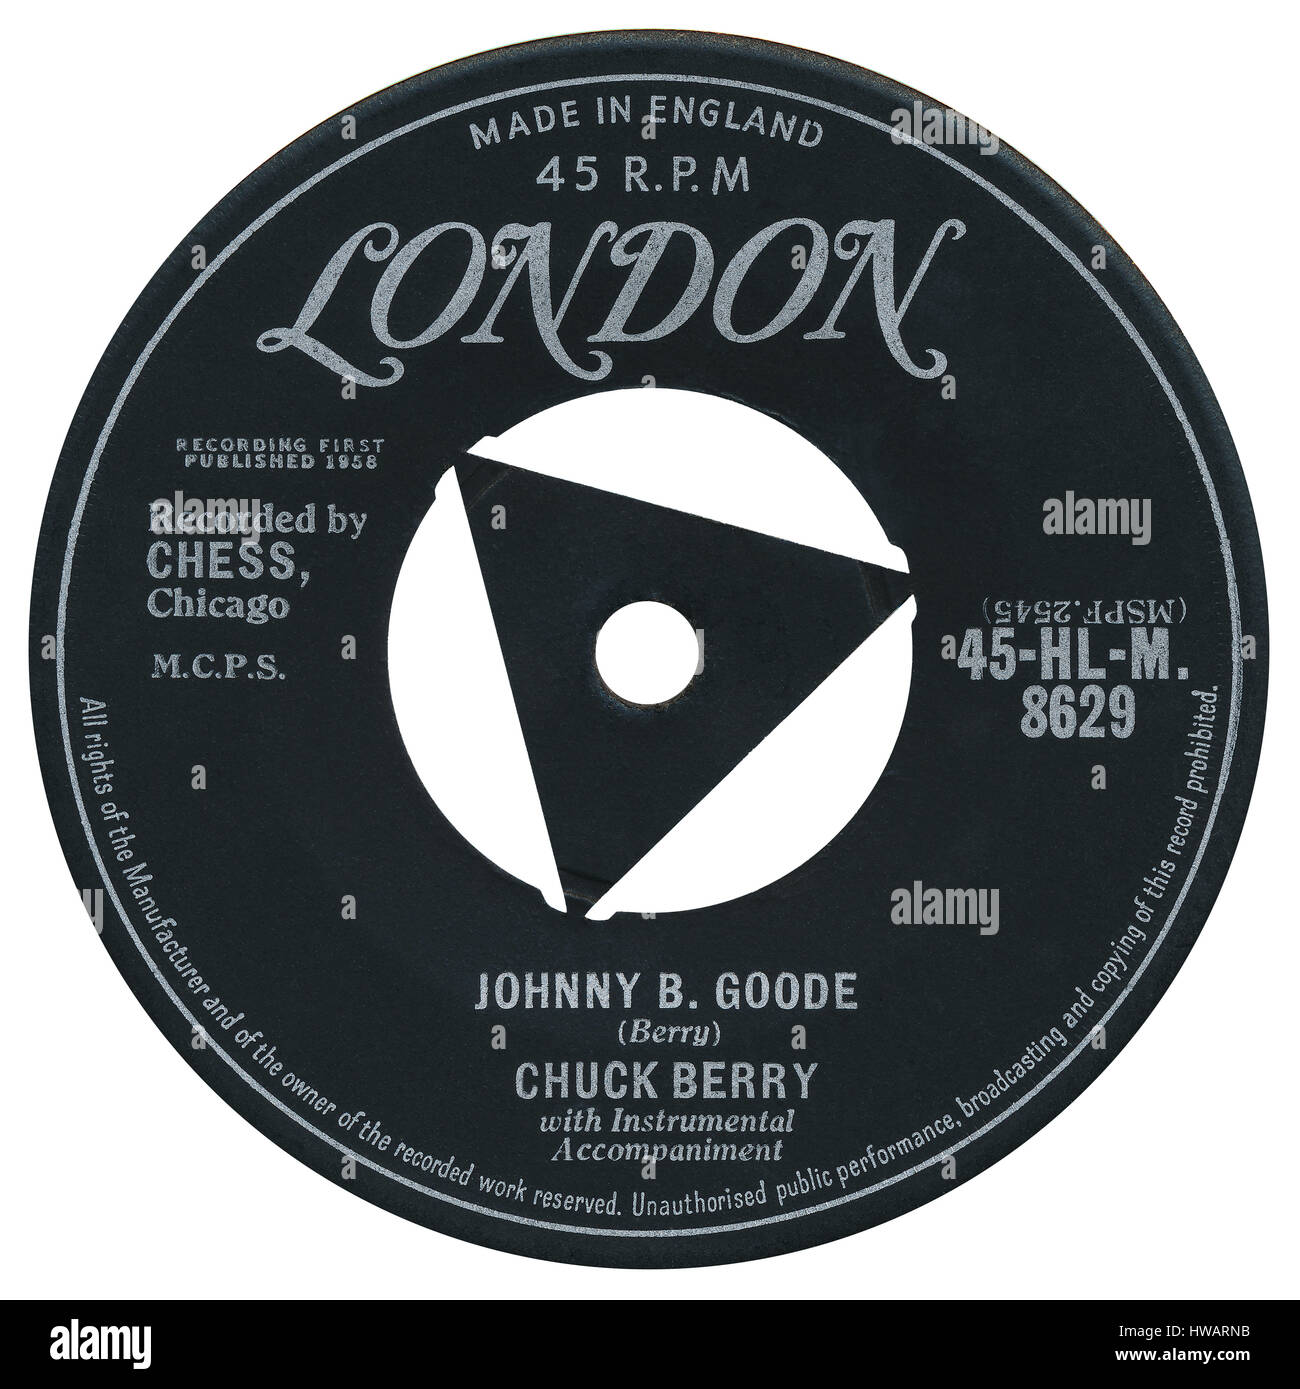 45 RPM 7' UK record label of Johnny B. Goode by Chuck Berry on the London label from May 1958. Stock Photo